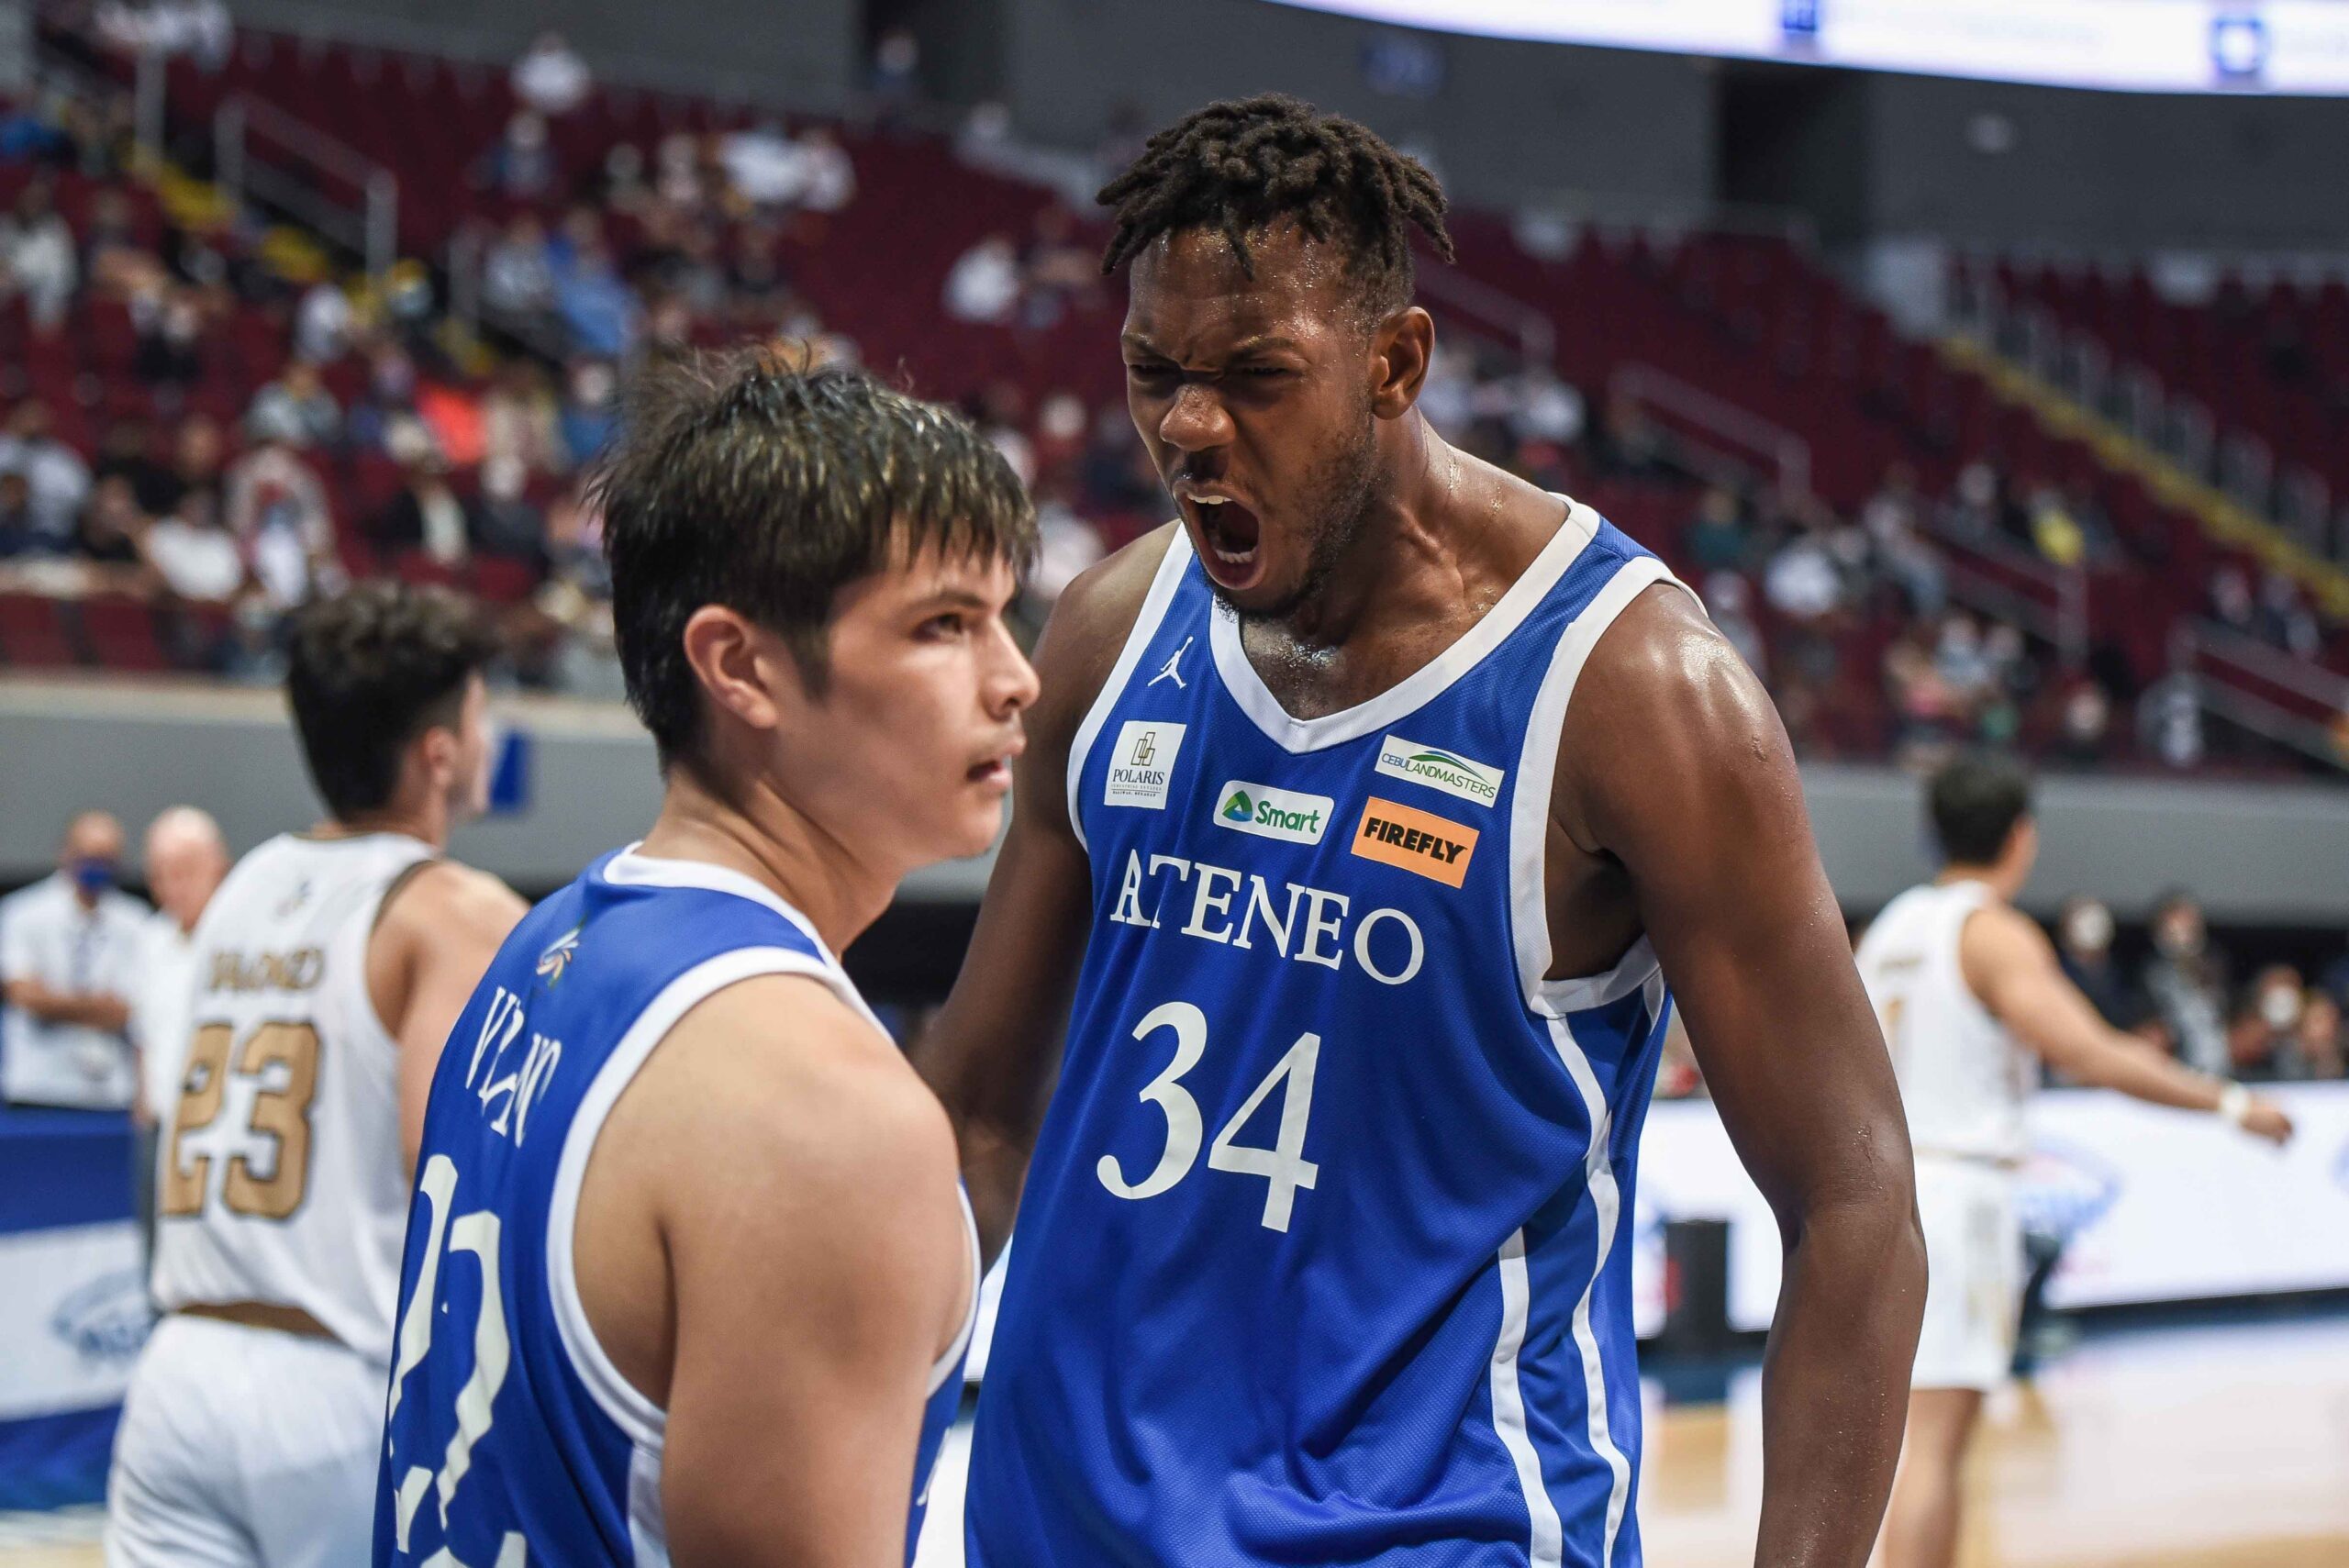 Ateneo’s Ange Kouame, UP’s Zavier Lucero neck-and-neck in early UAAP MVP race